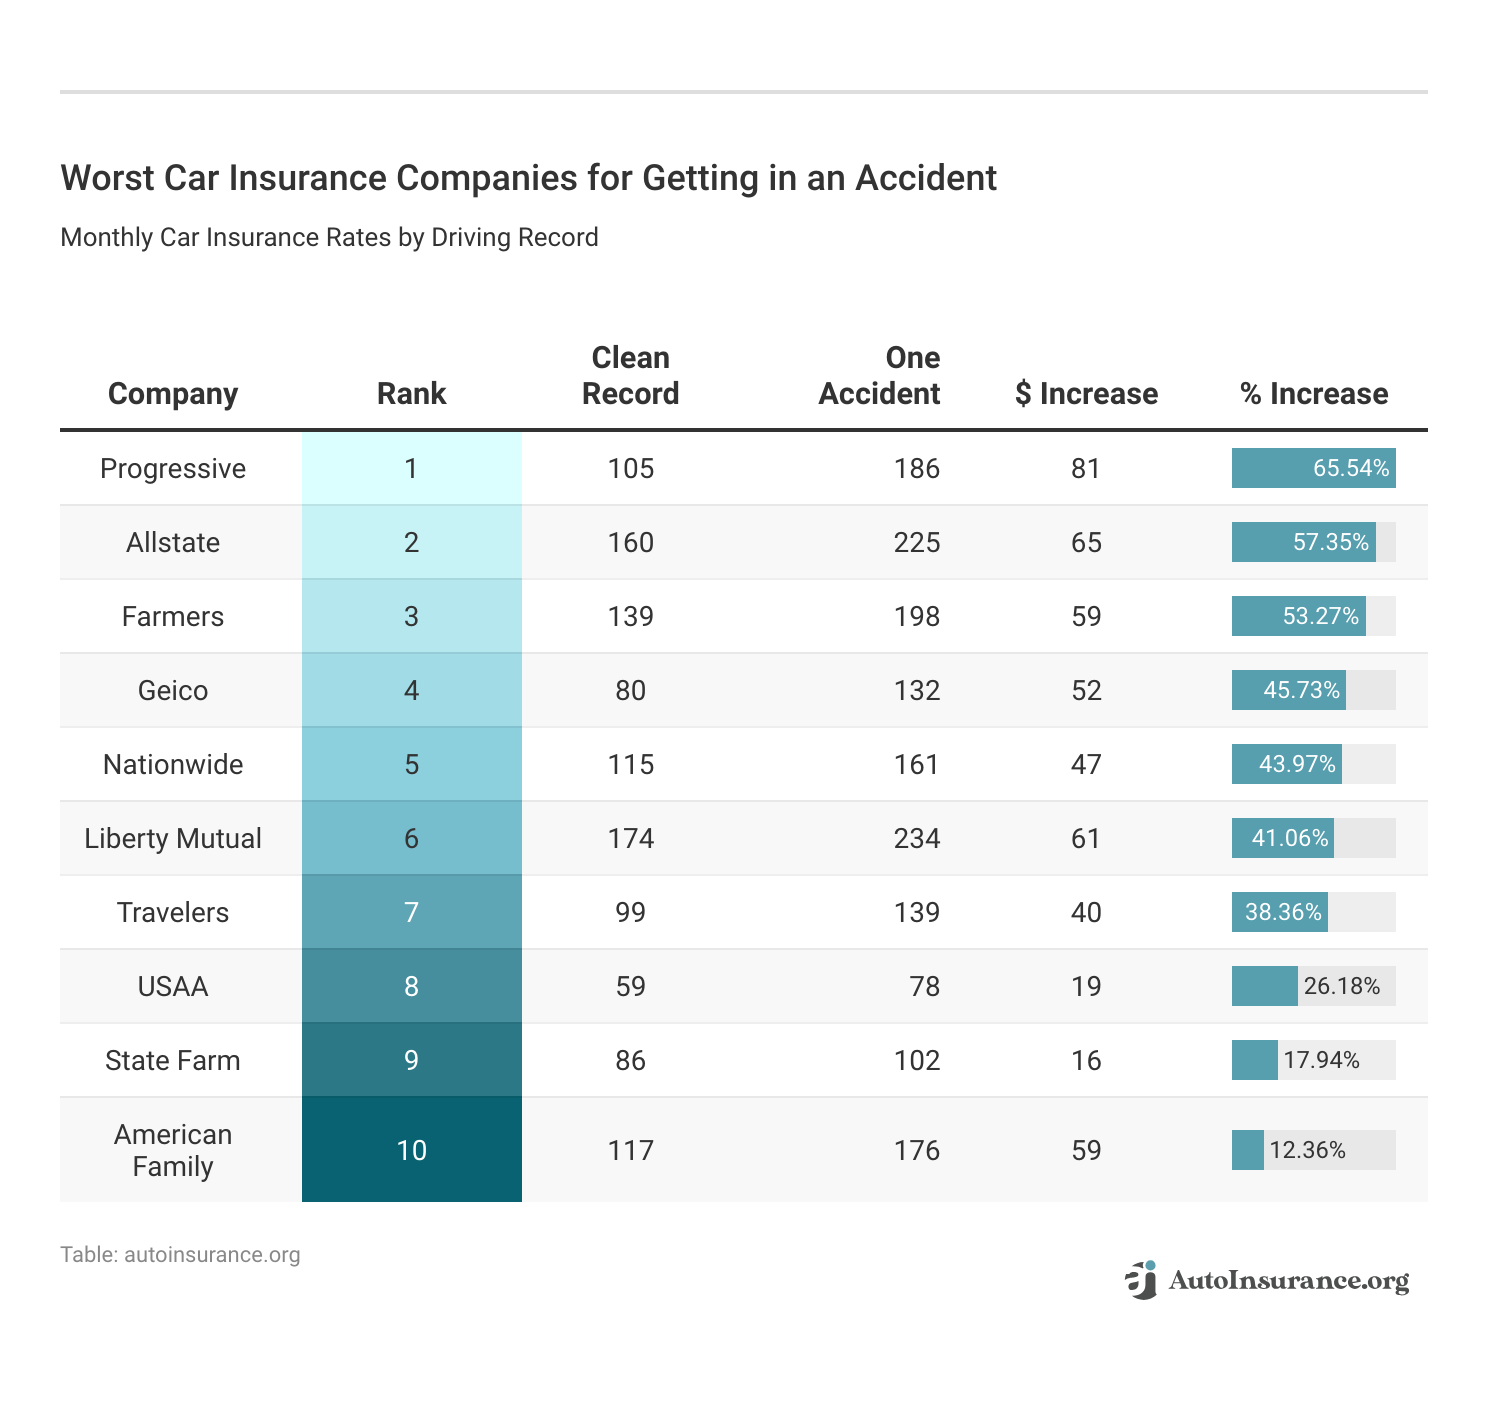 <h3>Worst Car Insurance Companies for Getting in an Accident</h3>